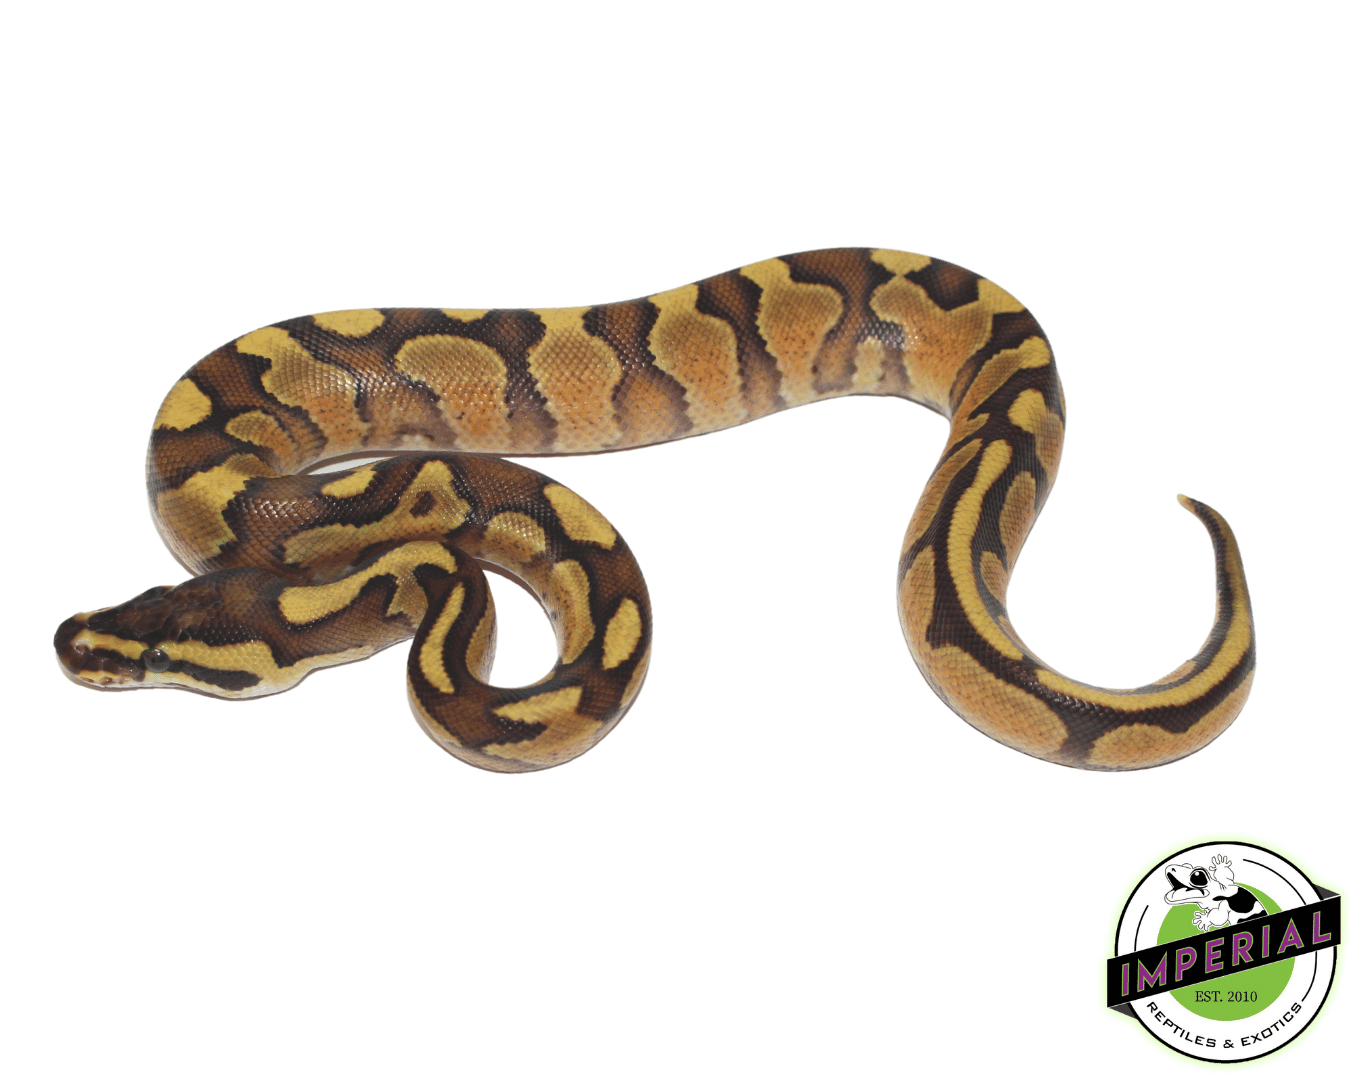 enchi spark ball python for sale, buy reptiles online